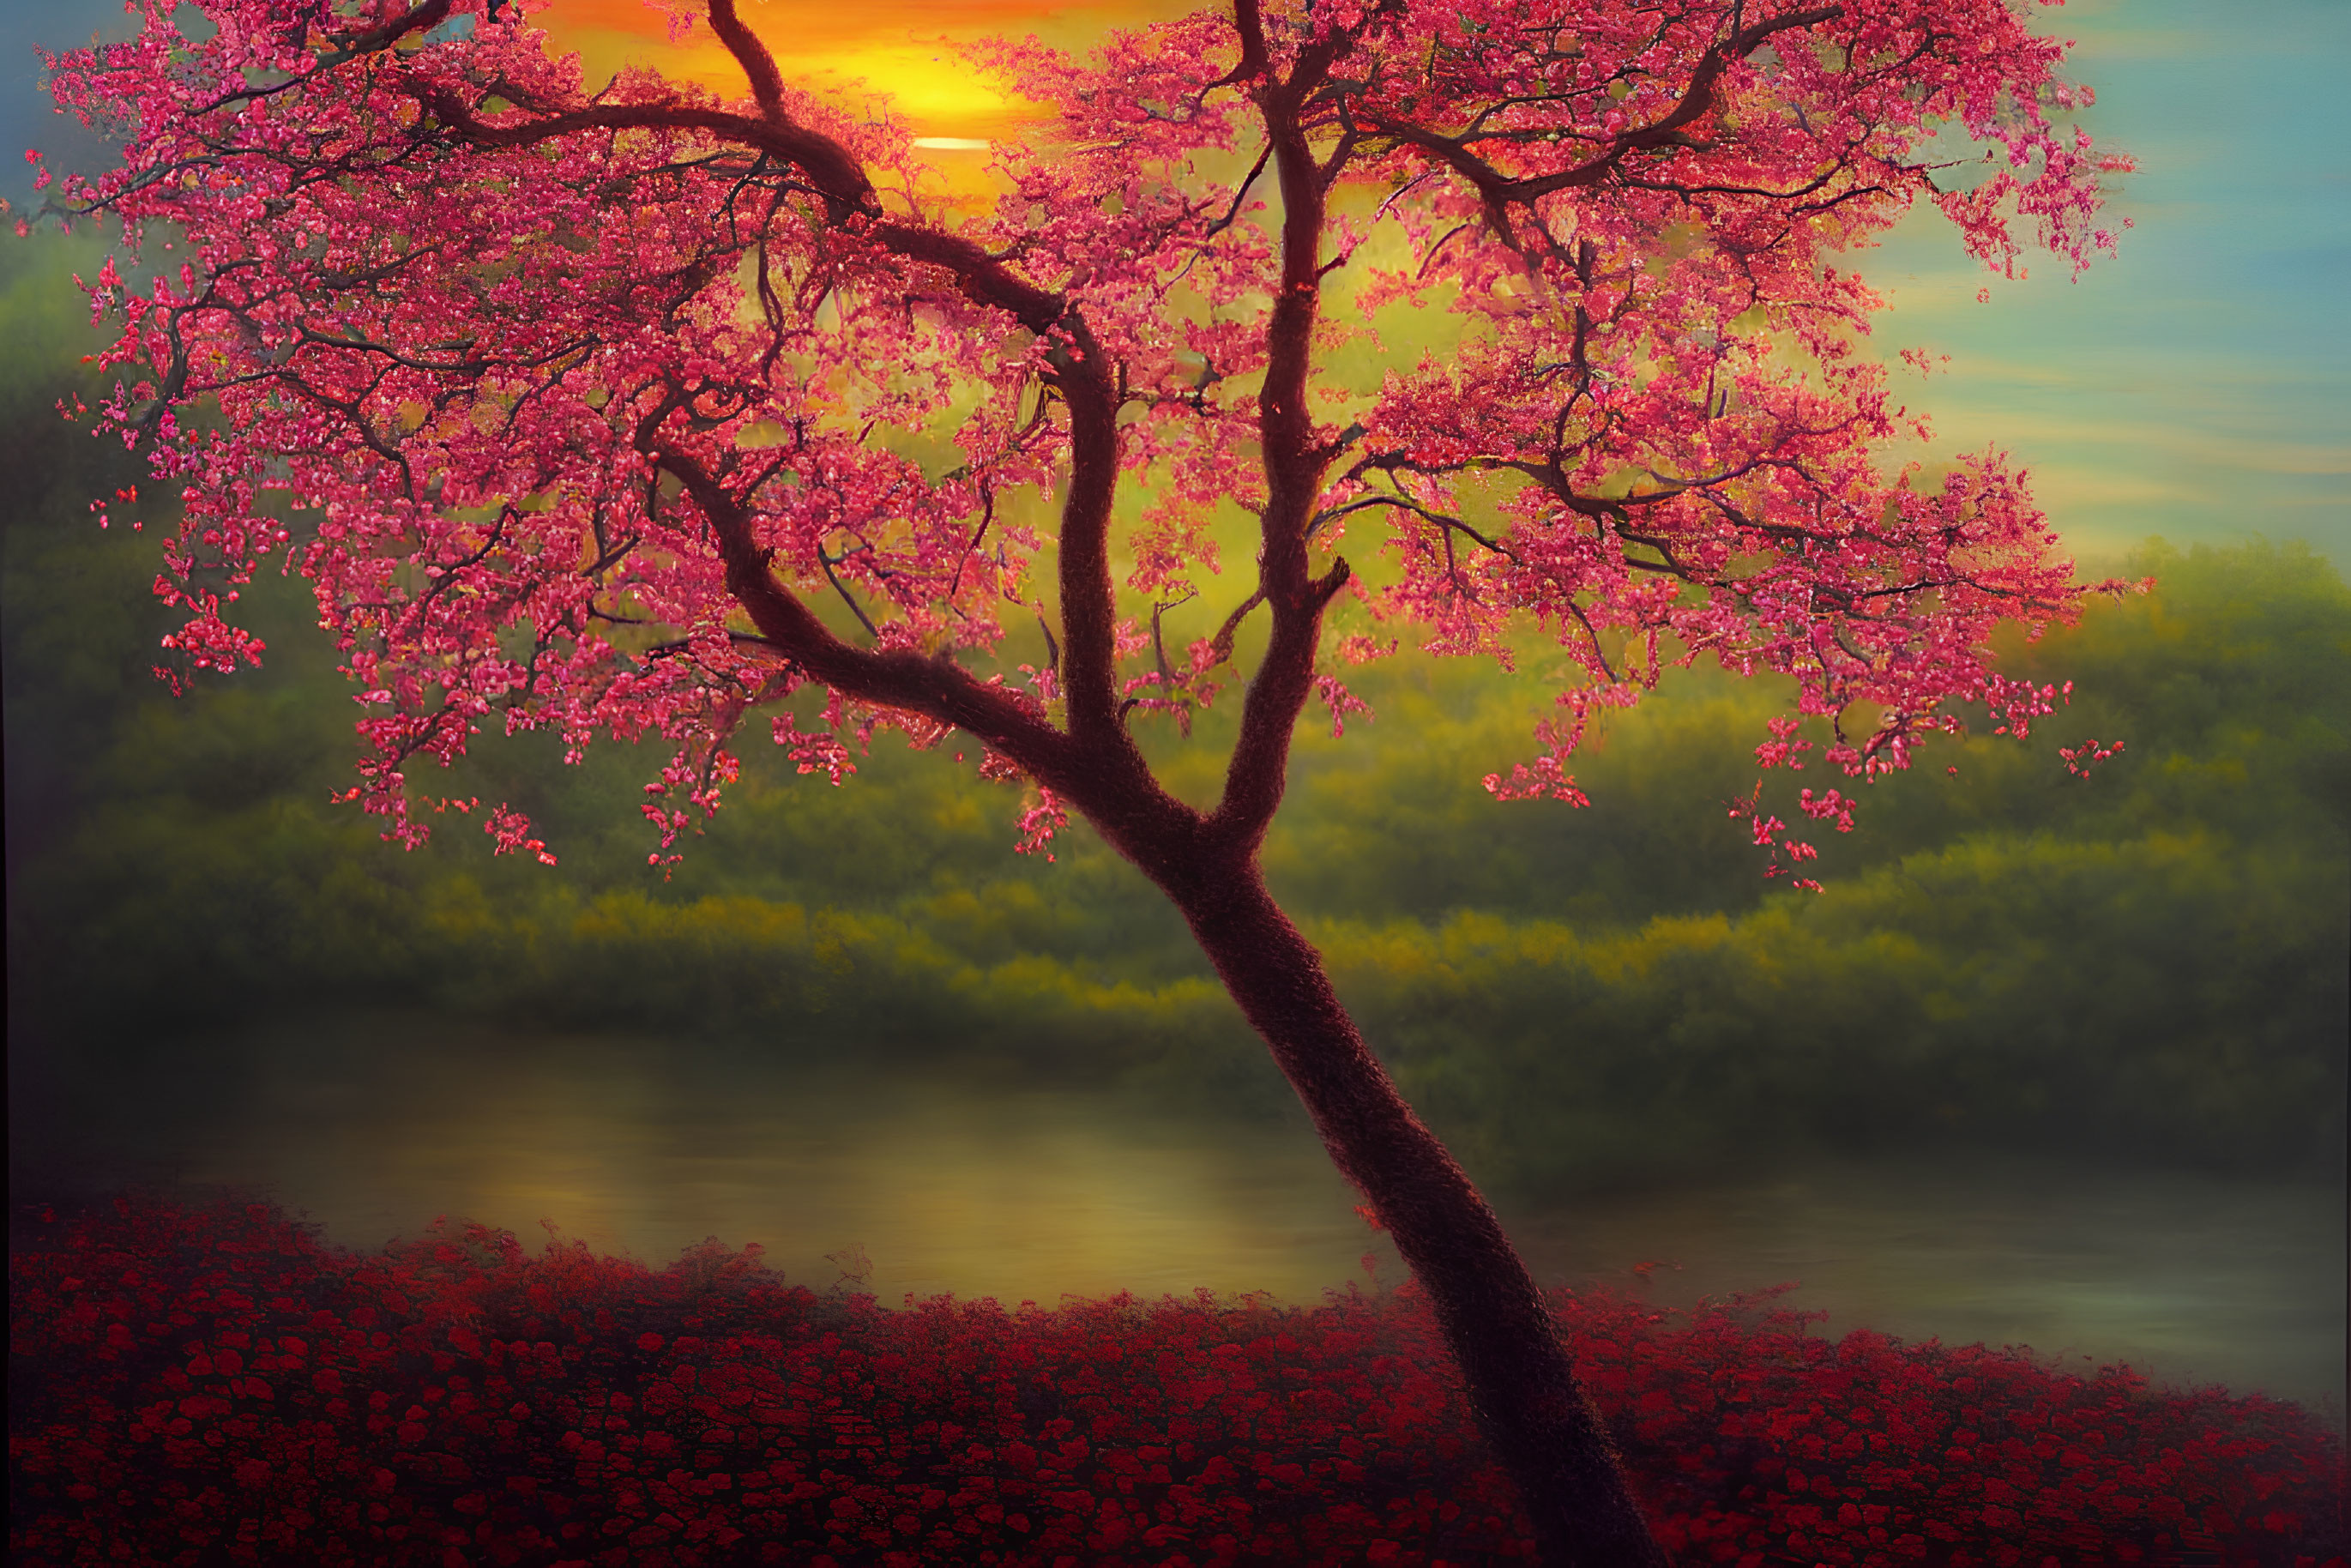 Colorful sunset painting featuring cherry blossom tree and serene river landscape